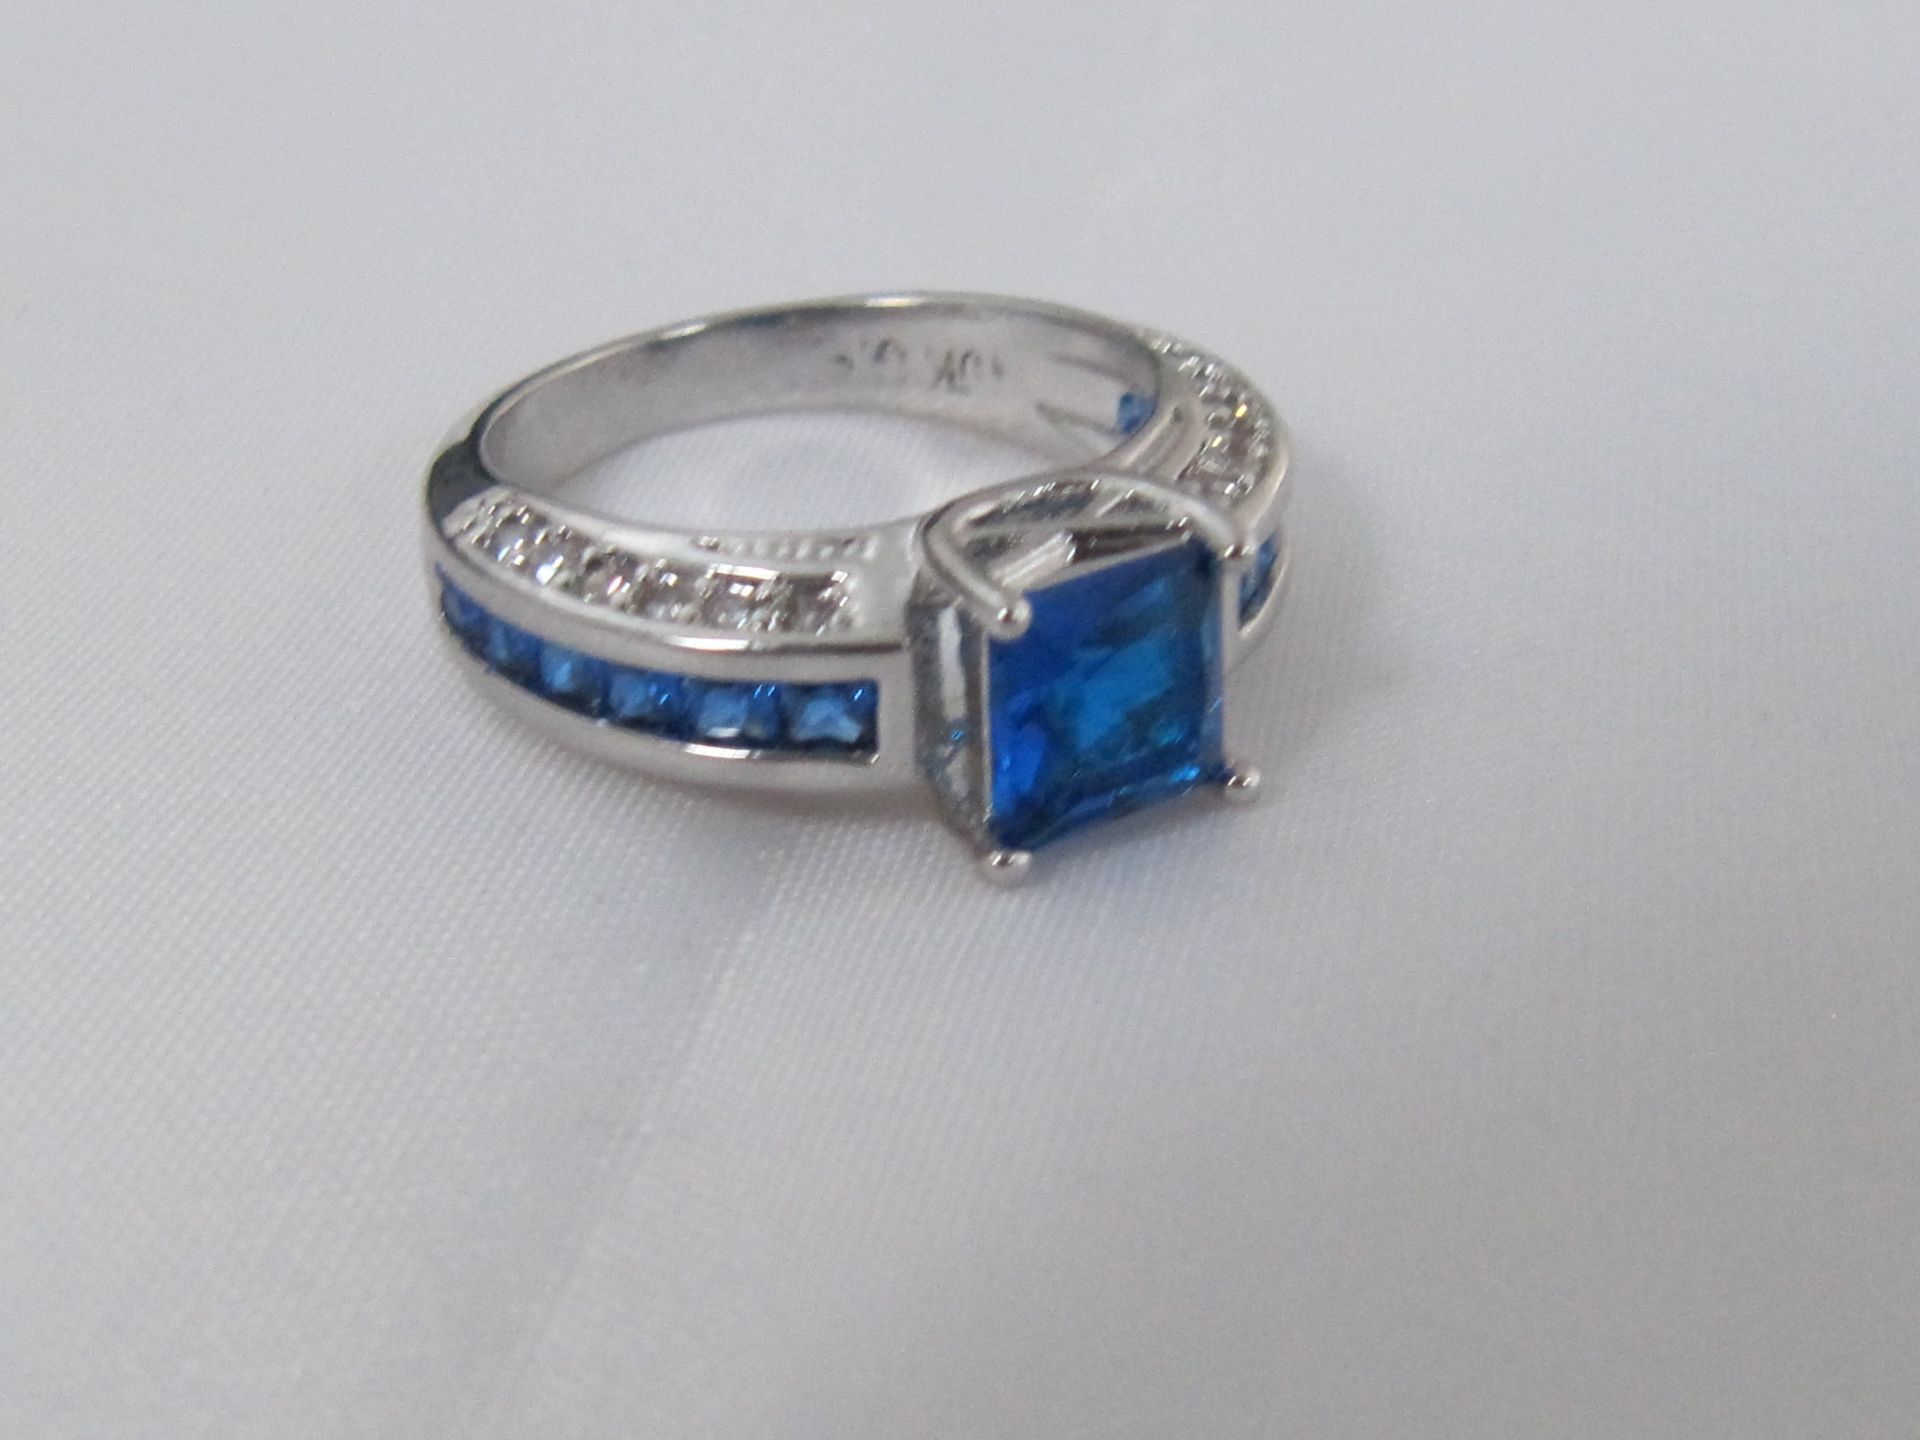 10k White Gold Filled with Blue Sapphires. Size R. - Image 5 of 5